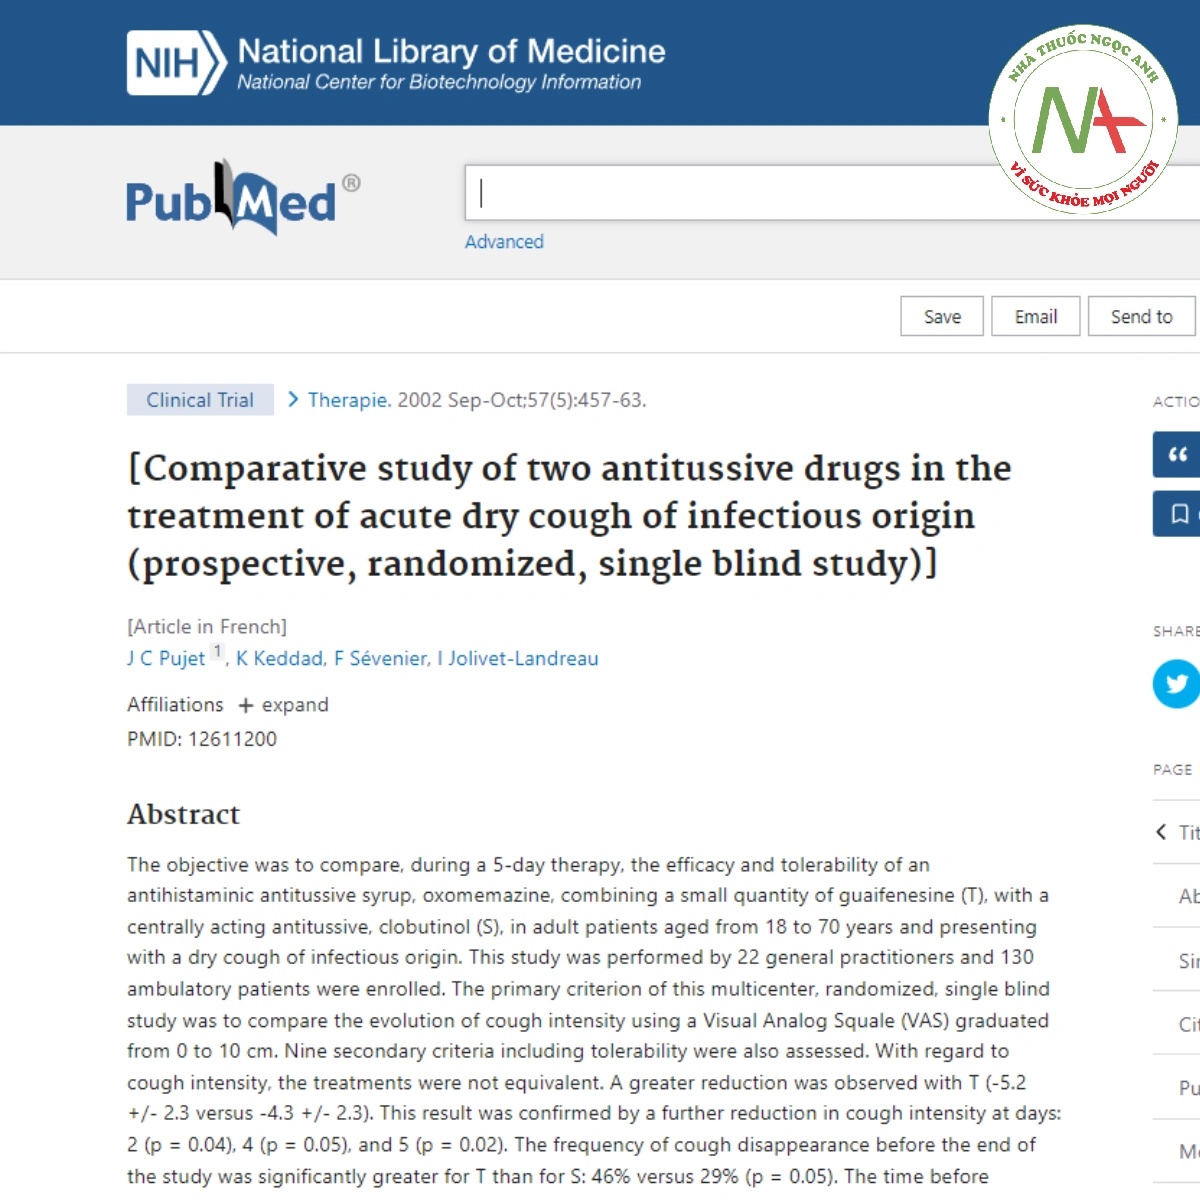 Comparative study of two antitussive drugs in the treatment of acute dry cough of infectious origin (prospective, randomized, single blind study)